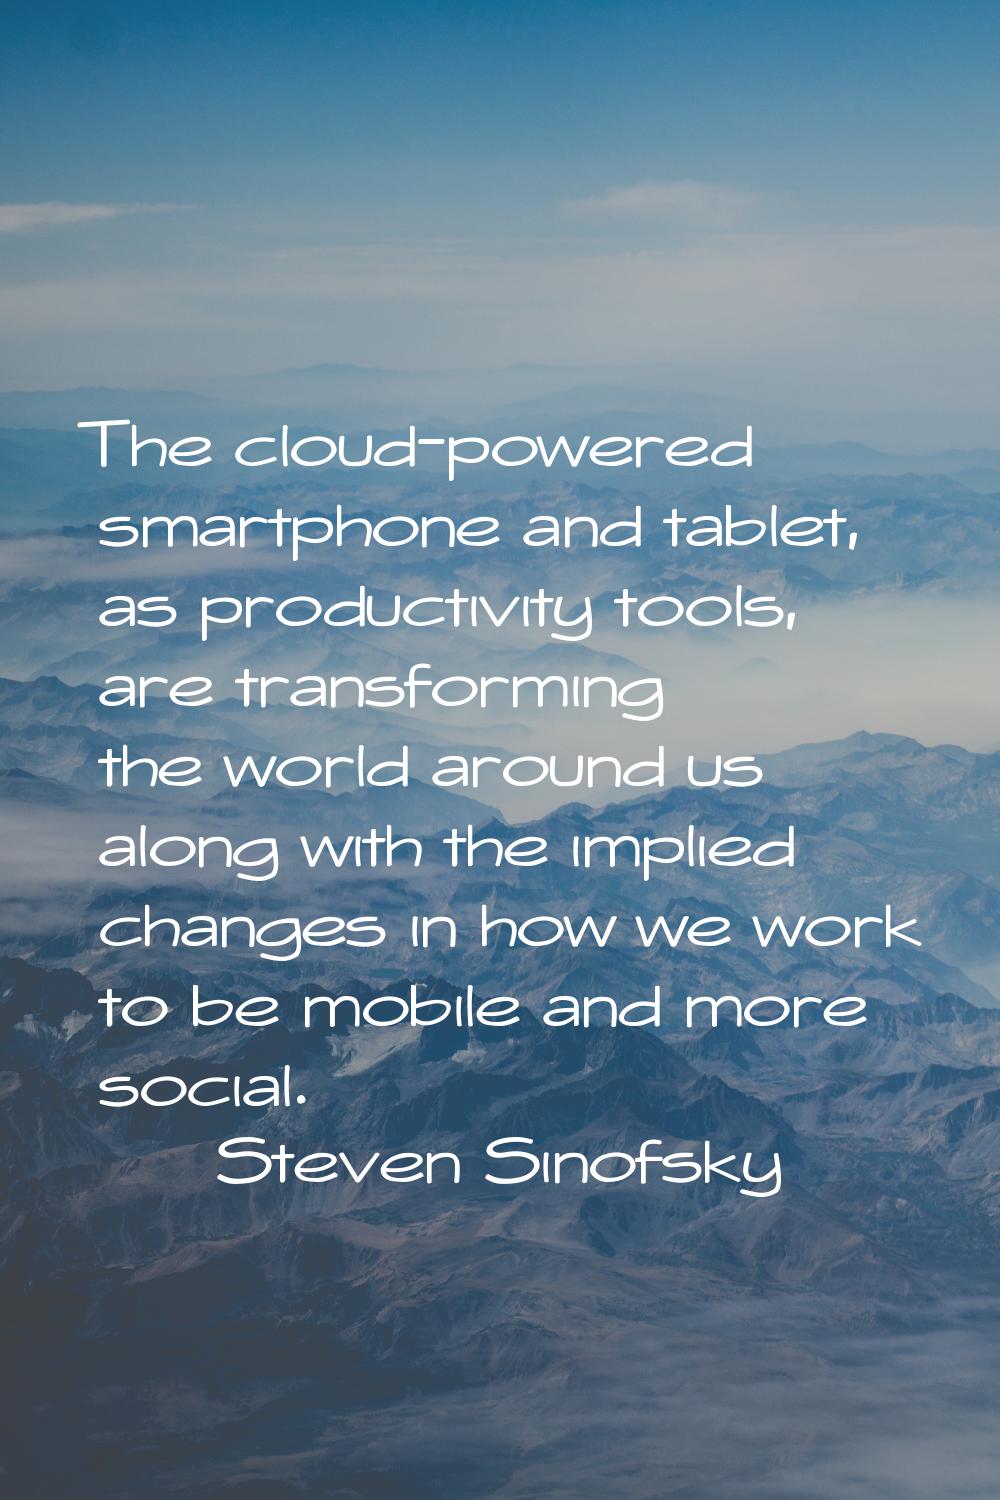 The cloud-powered smartphone and tablet, as productivity tools, are transforming the world around u